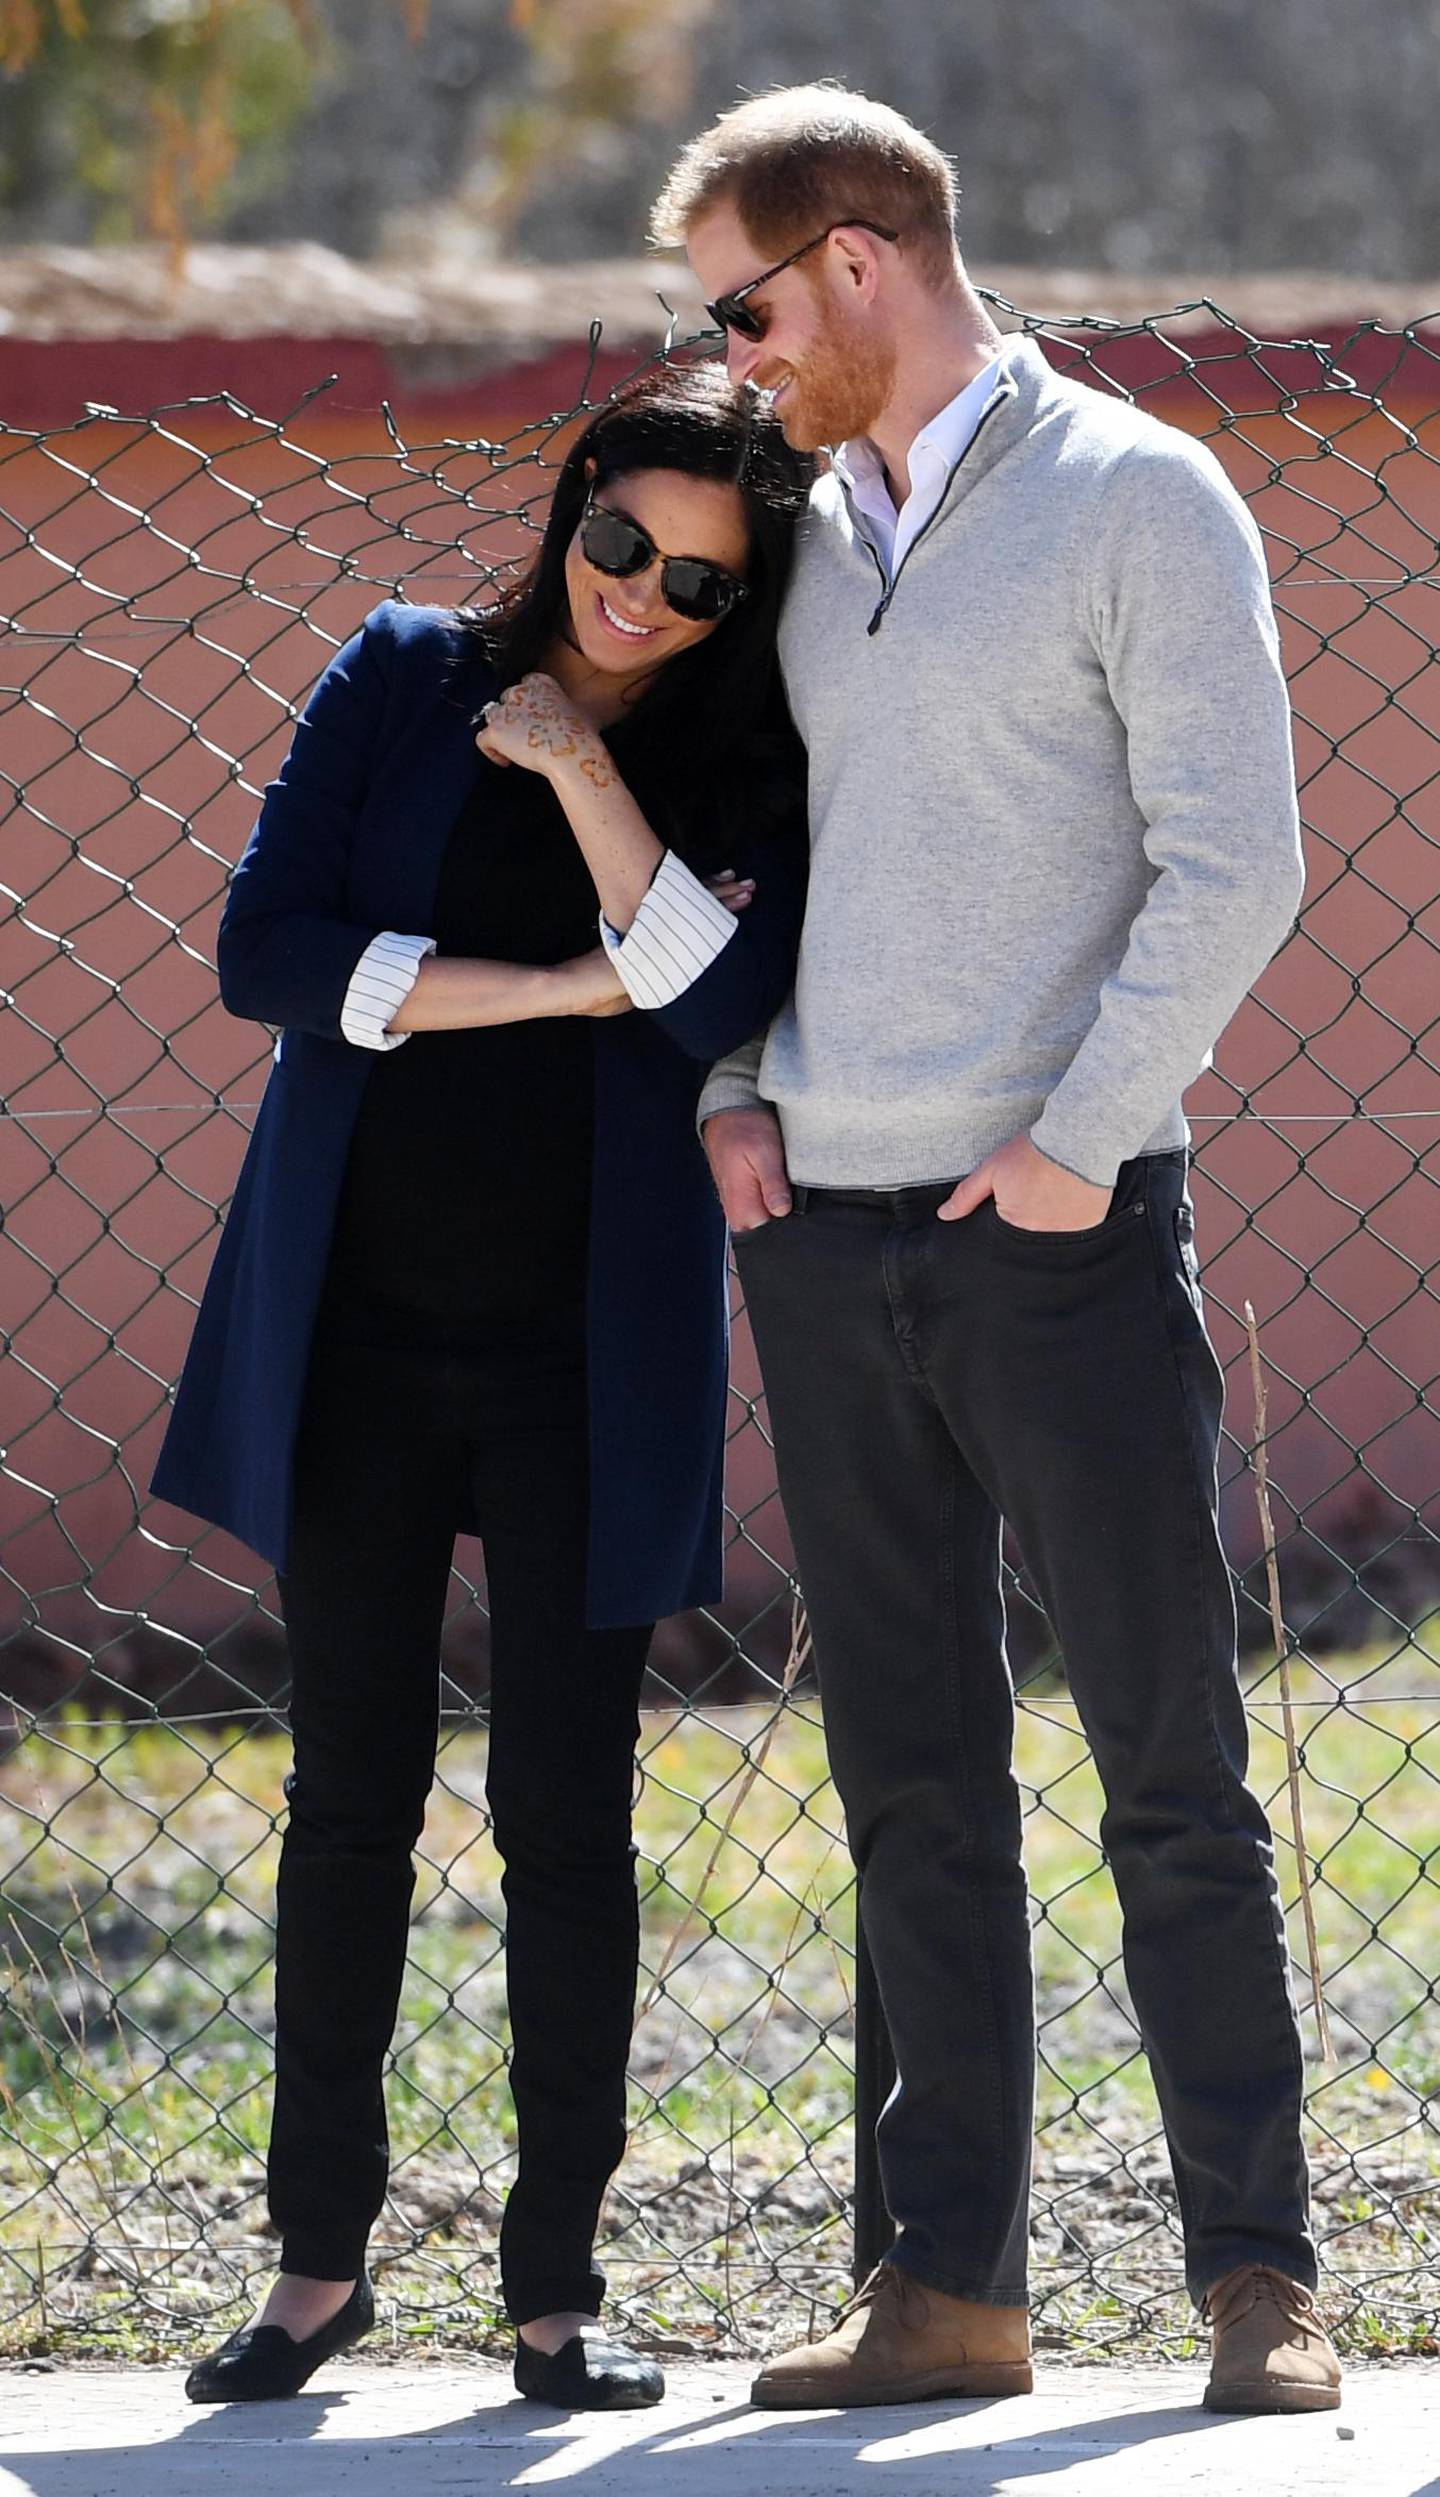 ASNI, MOROCCO - FEBRUARY 24:   Meghan, Duchess of Sussex and Prince Harry, Duke of Sussex watch students play football during their visit to LycÃ©e Qualifiant Grand Atlas, the local secondary school on February 24, 2019 in Asni, Morocco.  (Photo by Facundo Arrizabalaga - Pool/Getty Images)